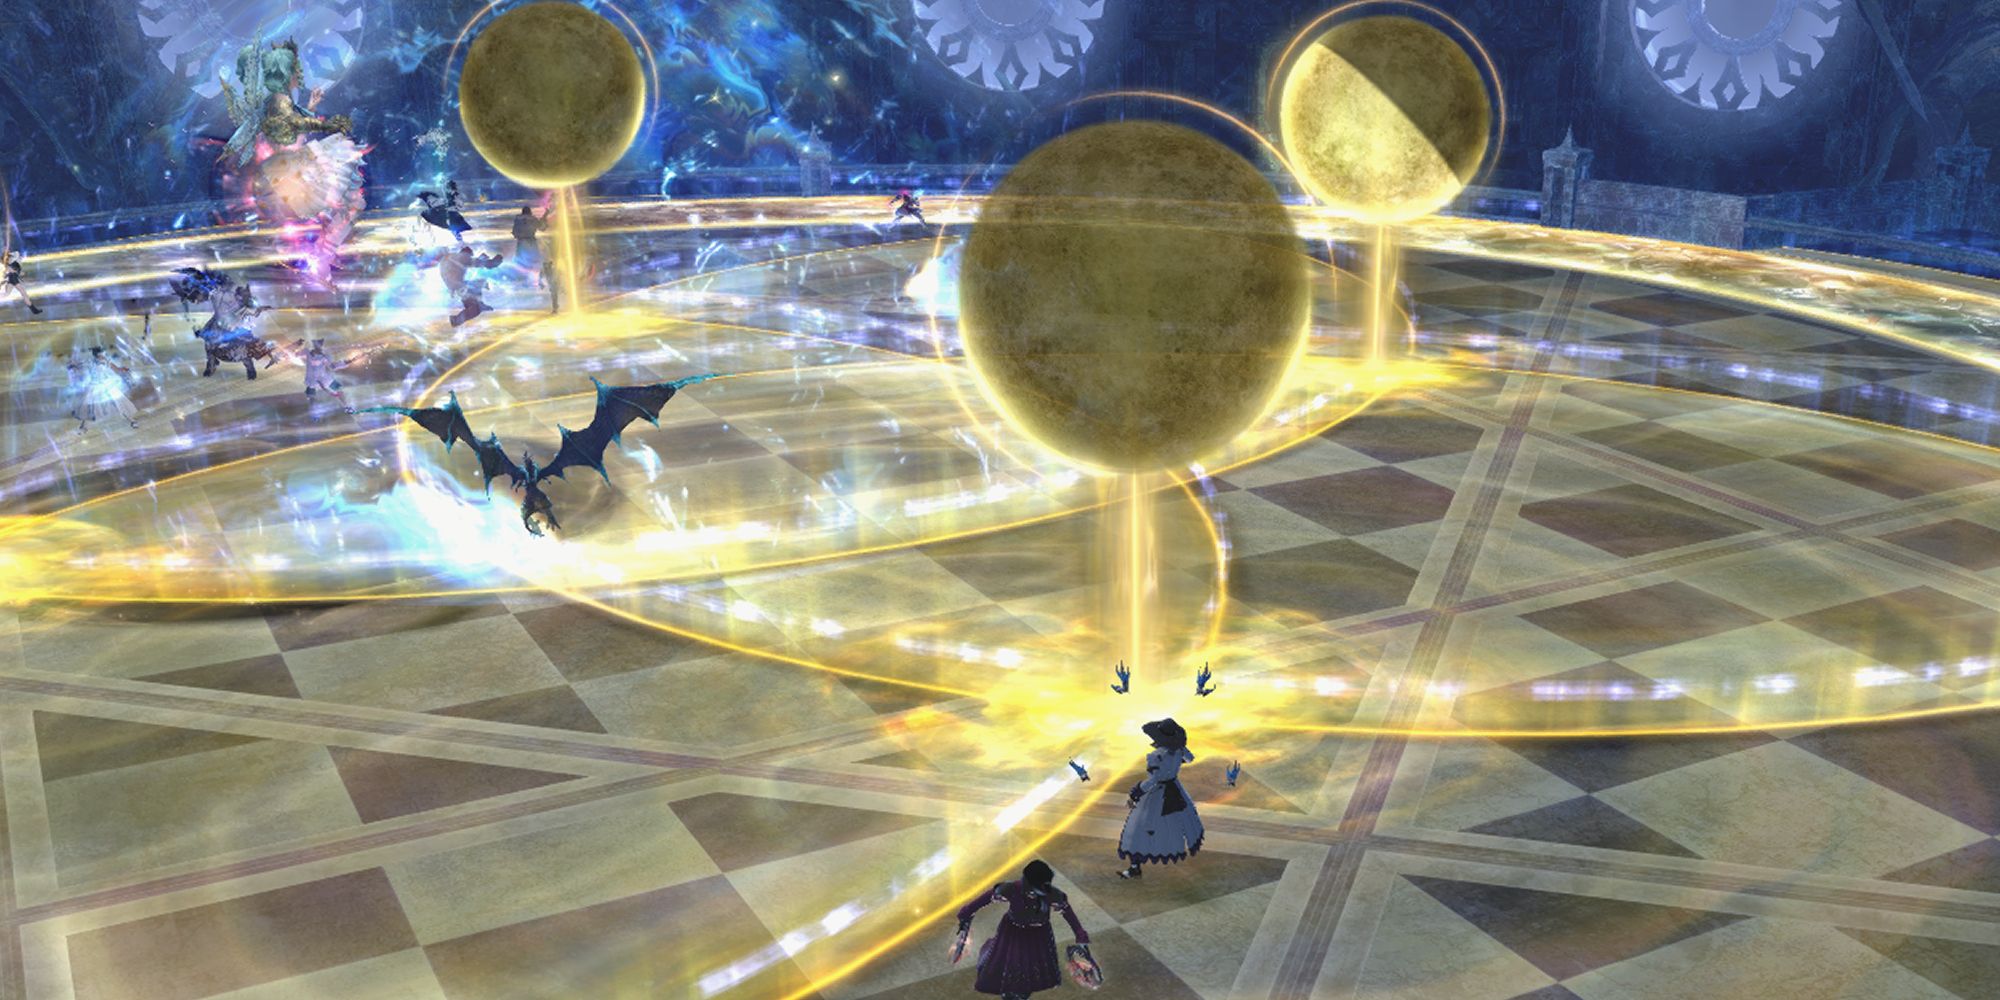 An image of the Menphina fight from Final Fantasy 14's Euphrosyne raid, demonstrating her alternate use of Love's Light. Moon symbols appear over danger zones on the floor, one of which is waxing while the other moons are new. The waxing moons will explode first, so the player is positioned in a new moon zone.